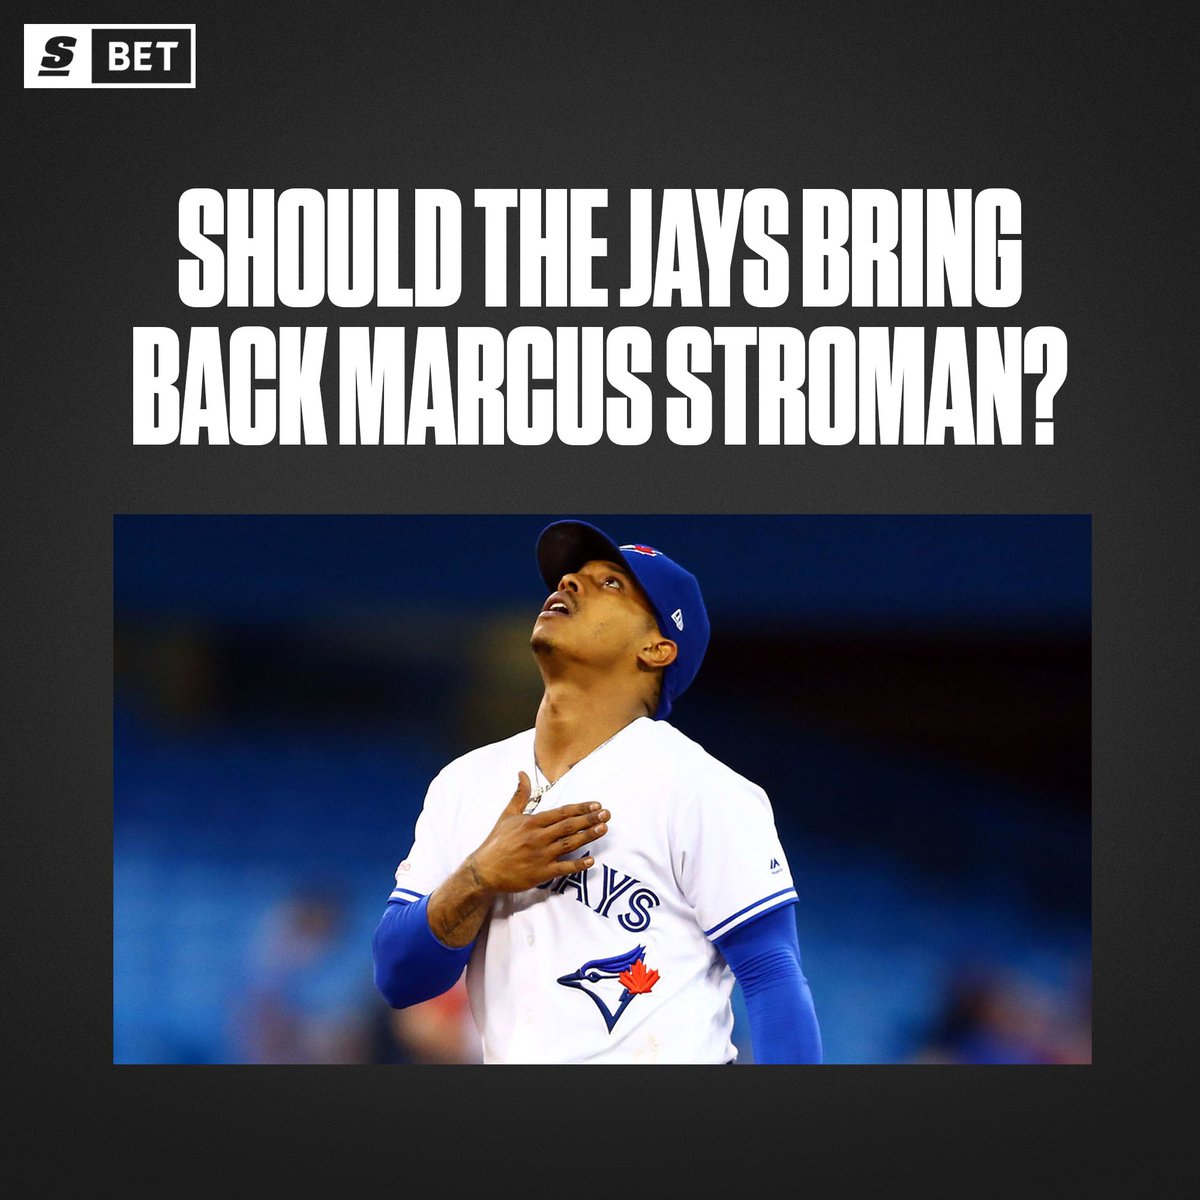 Would you like to see a trade including Stroman? 🤔